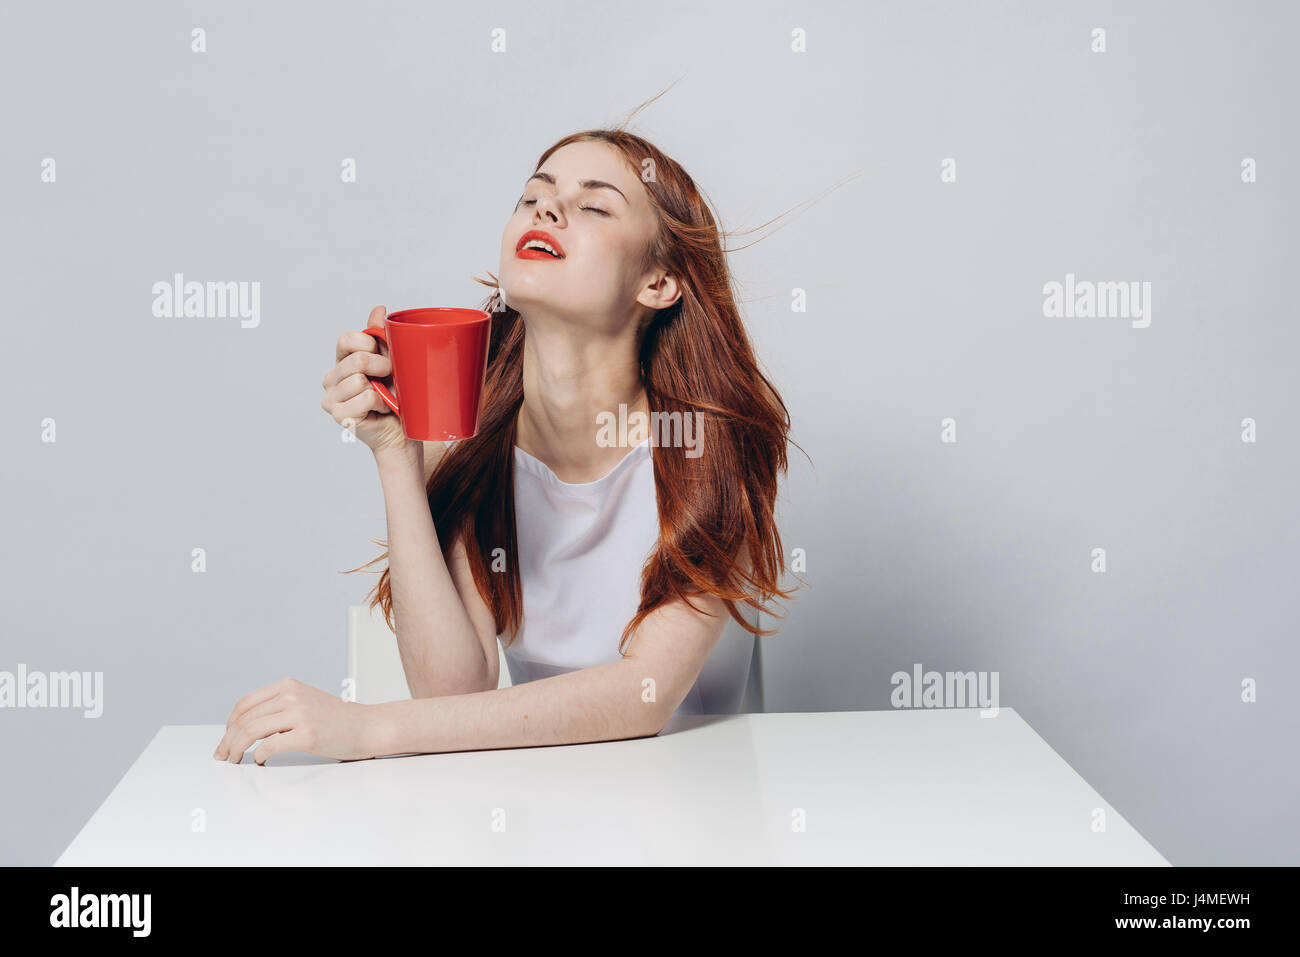 Caucasian woman sitting at windy table holding red cup Stock Photo